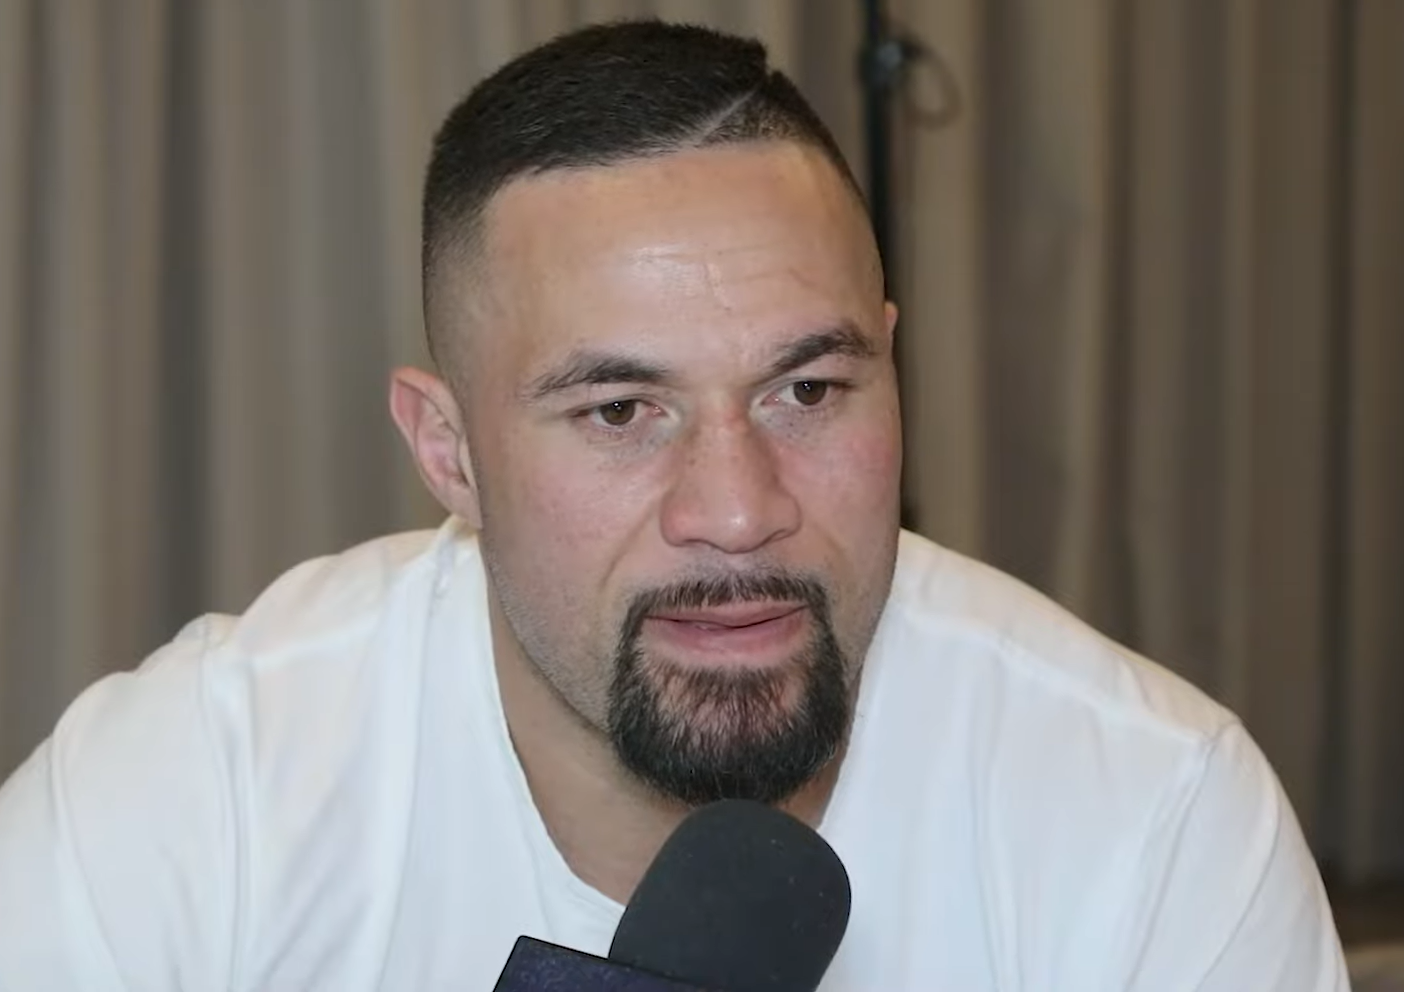 ''It would be astronomical'': former world heavyweight Bellew proposes a new sparring partner for Usyk instead of Fury